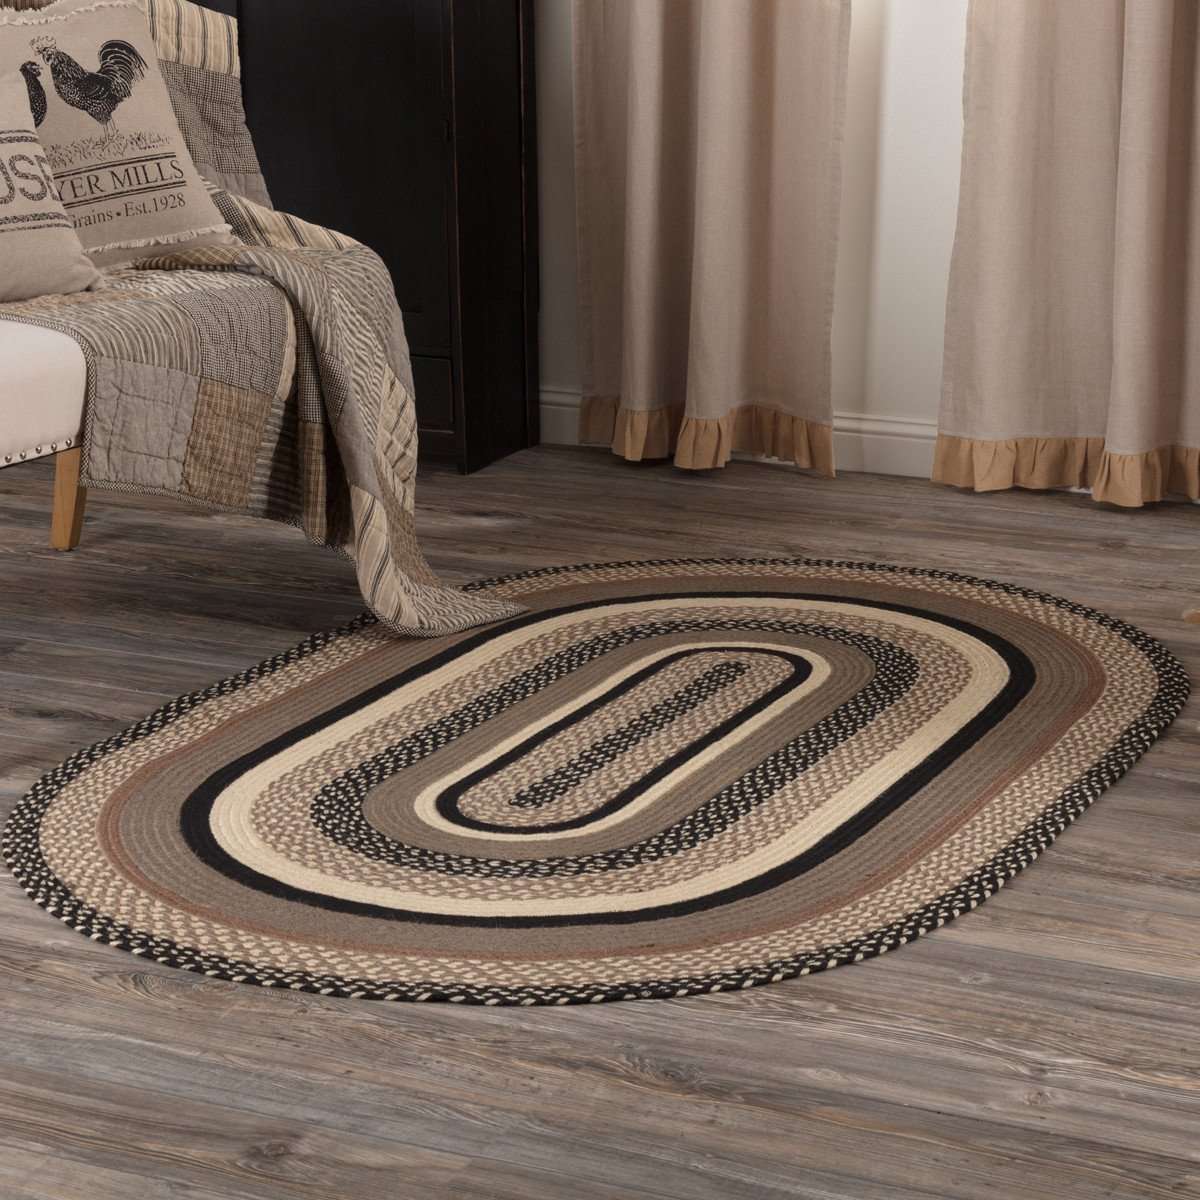 Sawyer Mill Charcoal Jute Braided Oval Rugs VHC Brands Rugs VHC Brands 4'x6' 